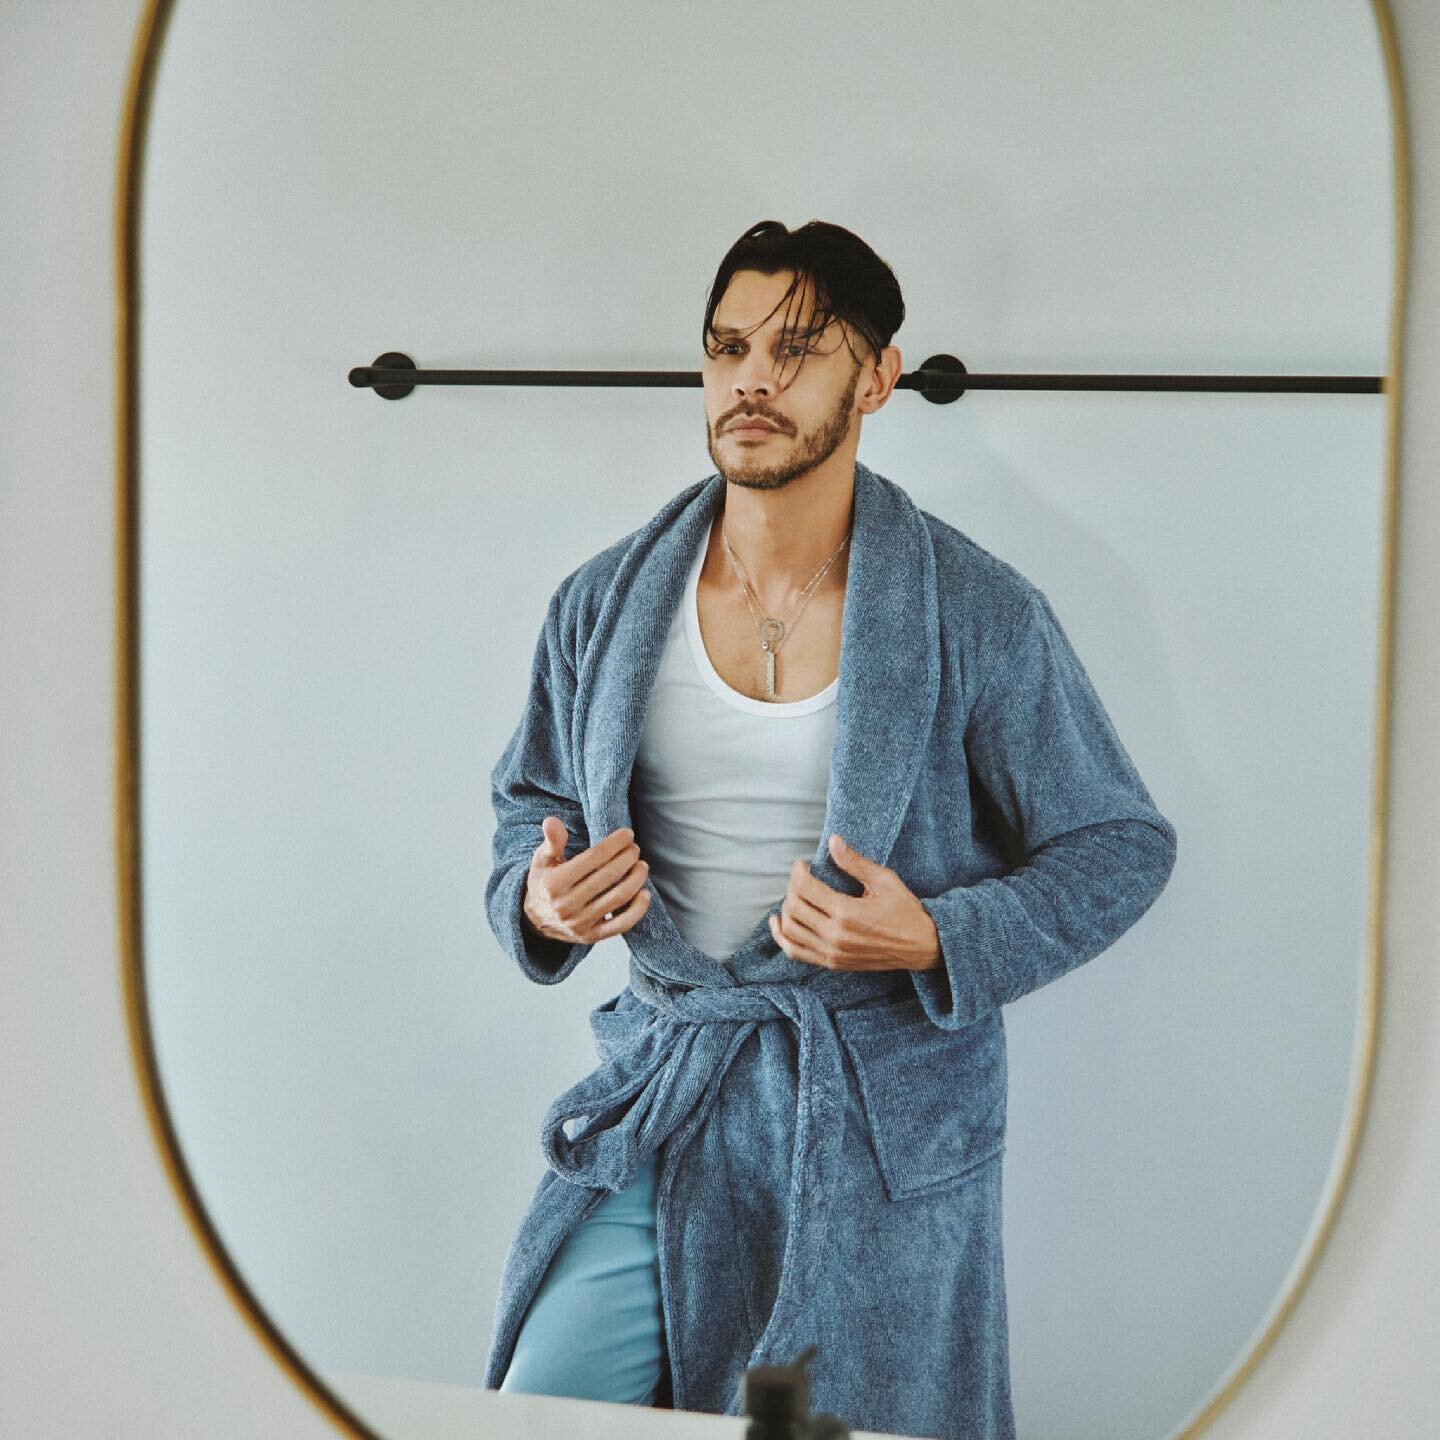 Game changing loungewear to live your coziest life, even if it&rsquo;s for your eyes only.  Full feature on Jacobsman.com to shop these @woolworths_sa looks. 

Photography @jacquesweyers.studio 

#woolworths #loungewear #style #athome #jacobsman #men